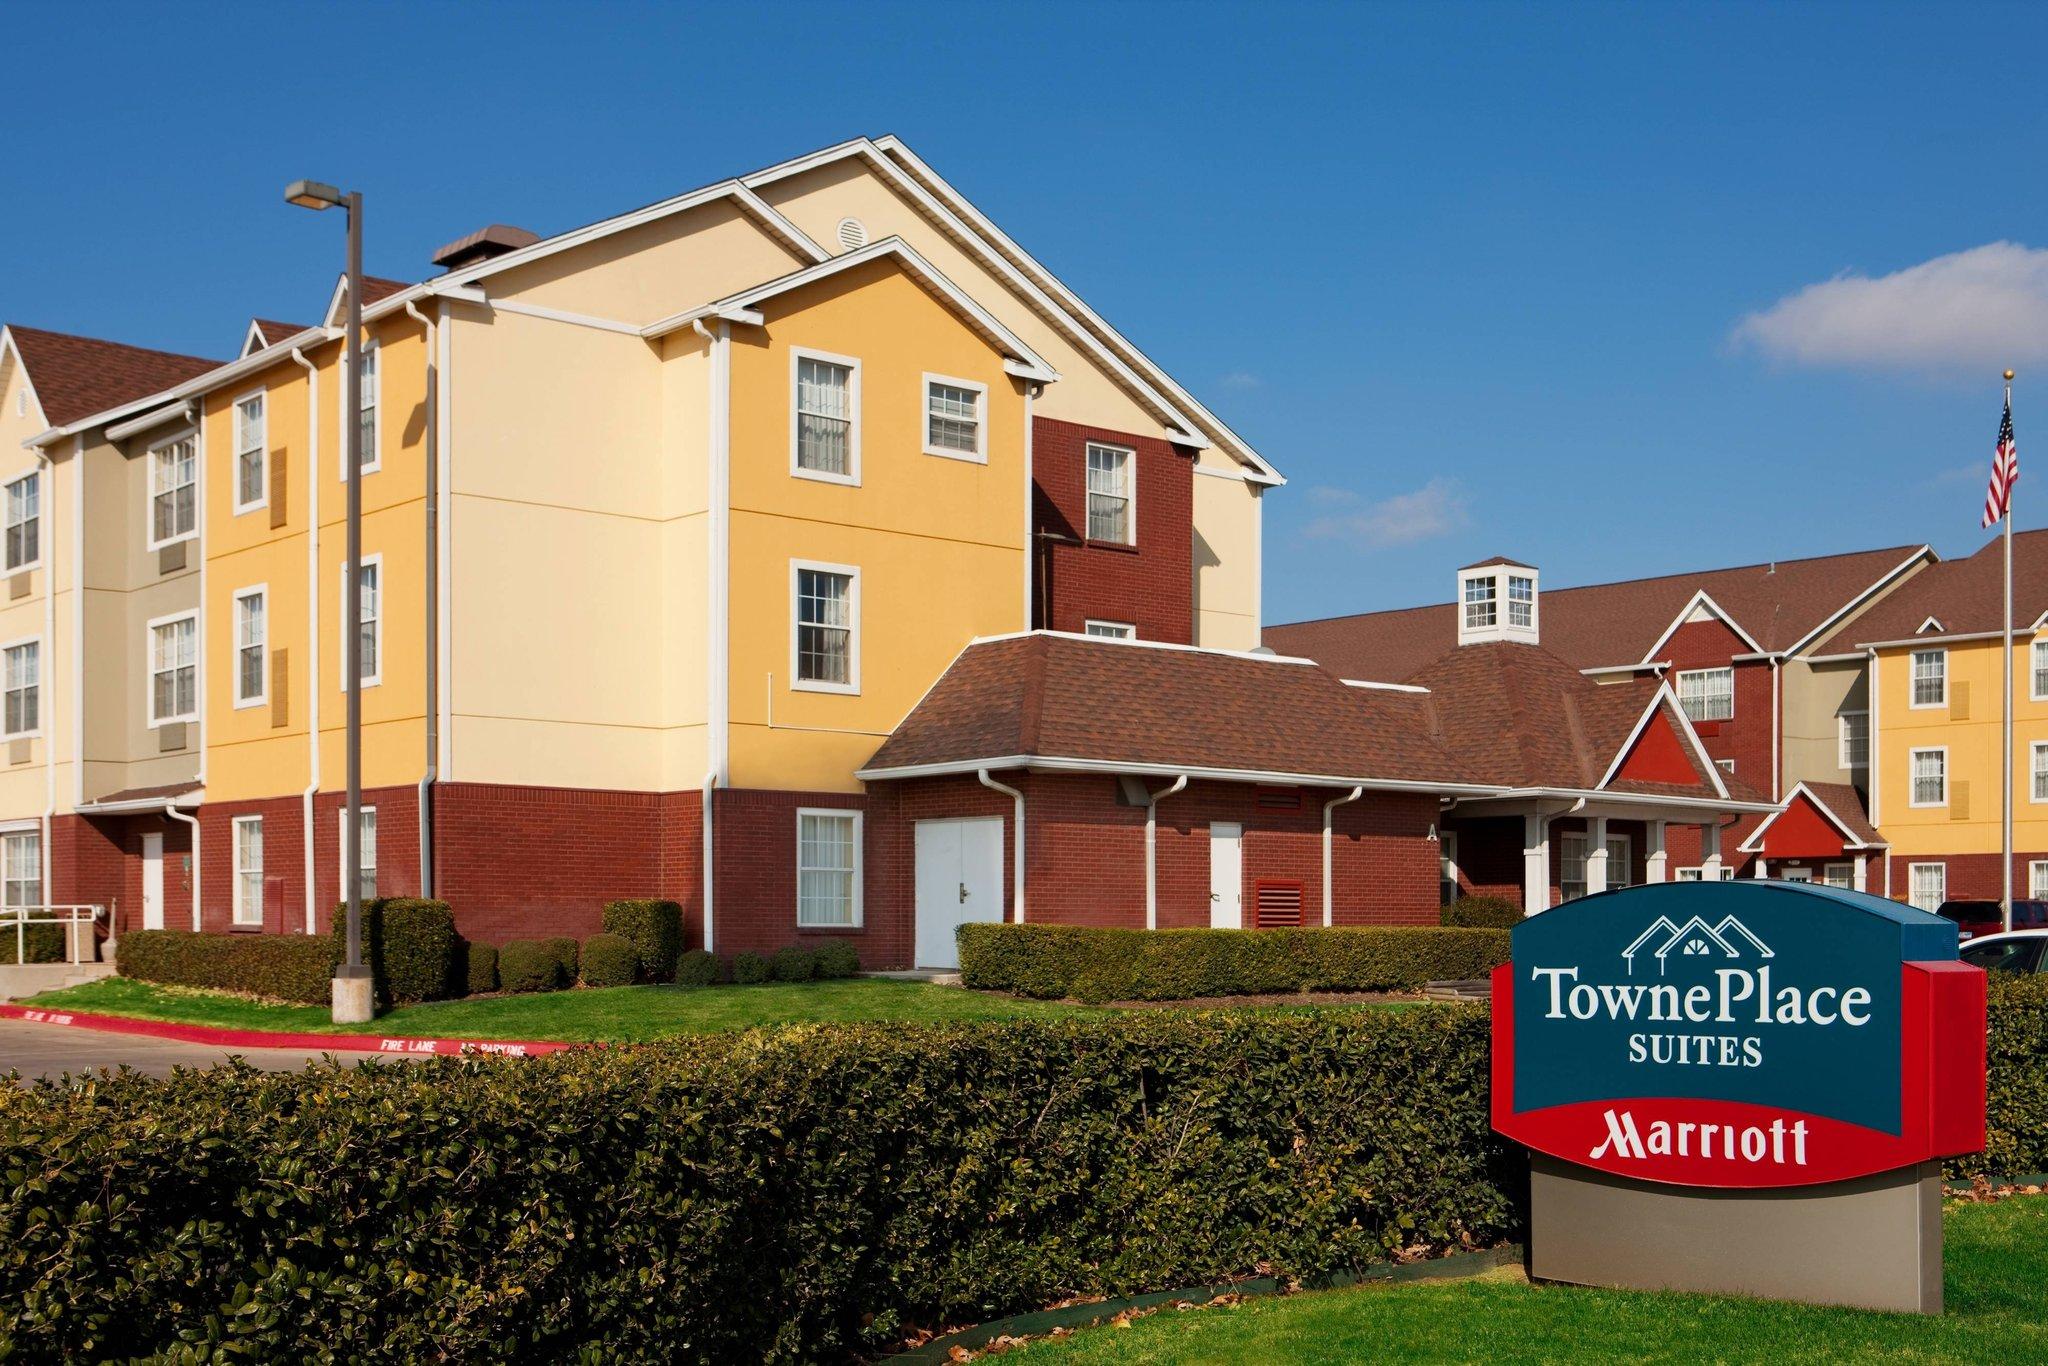 TownePlace Suites Fort Worth Southwest/TCU Area in Fort Worth, TX